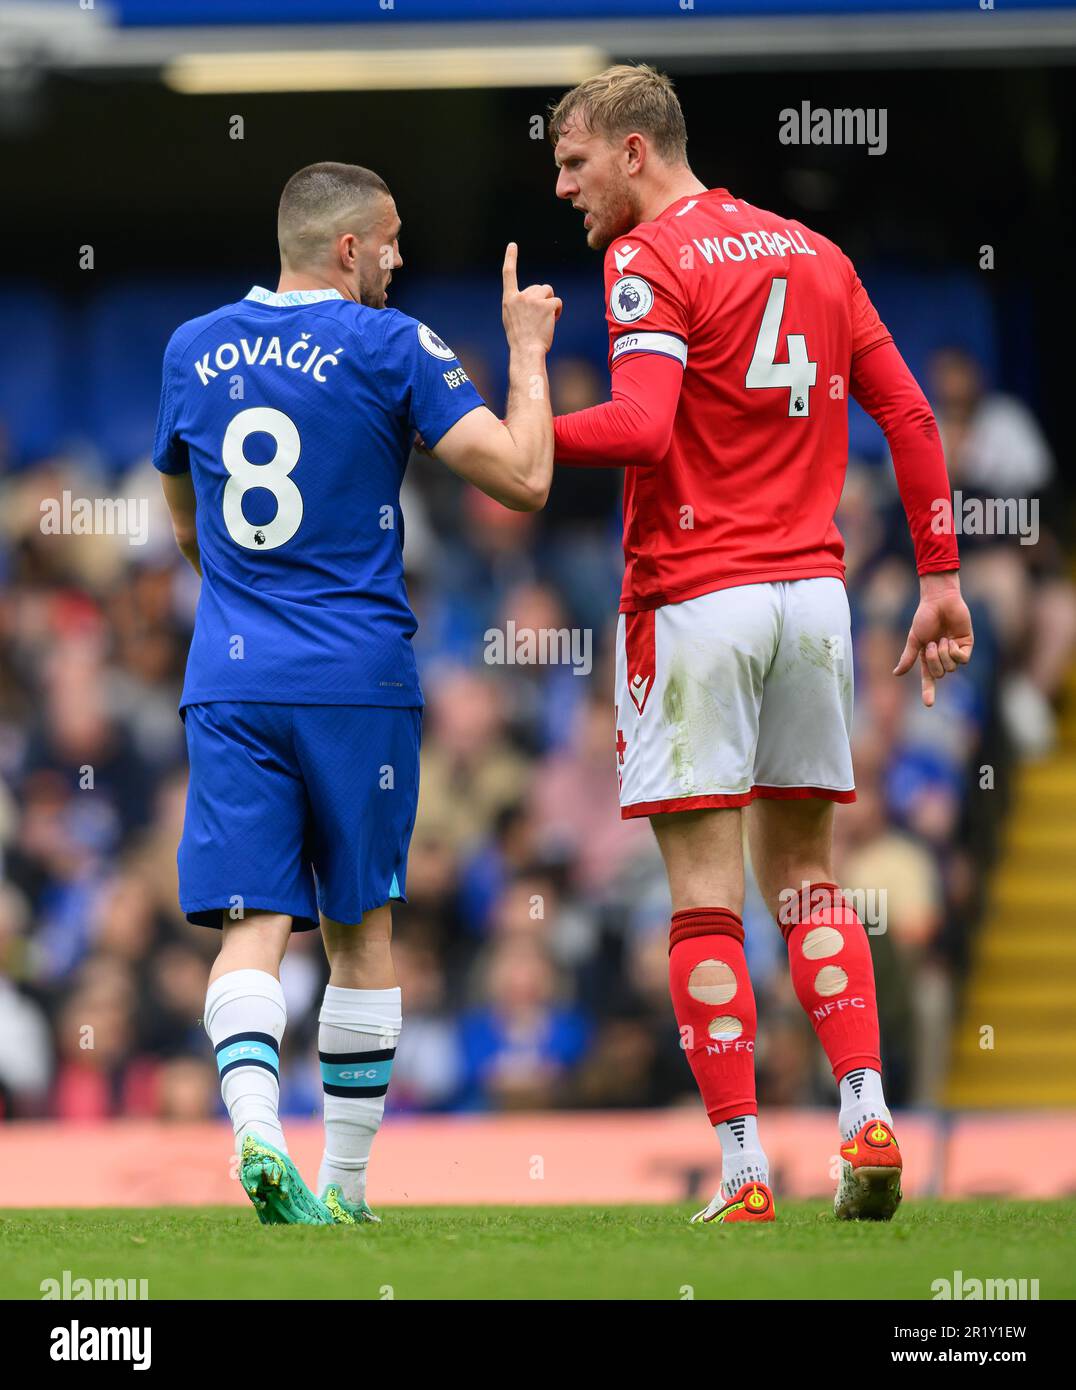 13 May 2023 - Chelsea v Nottingham Forest - Premier League - Stamford Bridge. Chelsea's Mateo Kovacic during the Premier League match at Stamford Bridge, London. Picture : Mark Pain / Alamy Live News Stock Photo